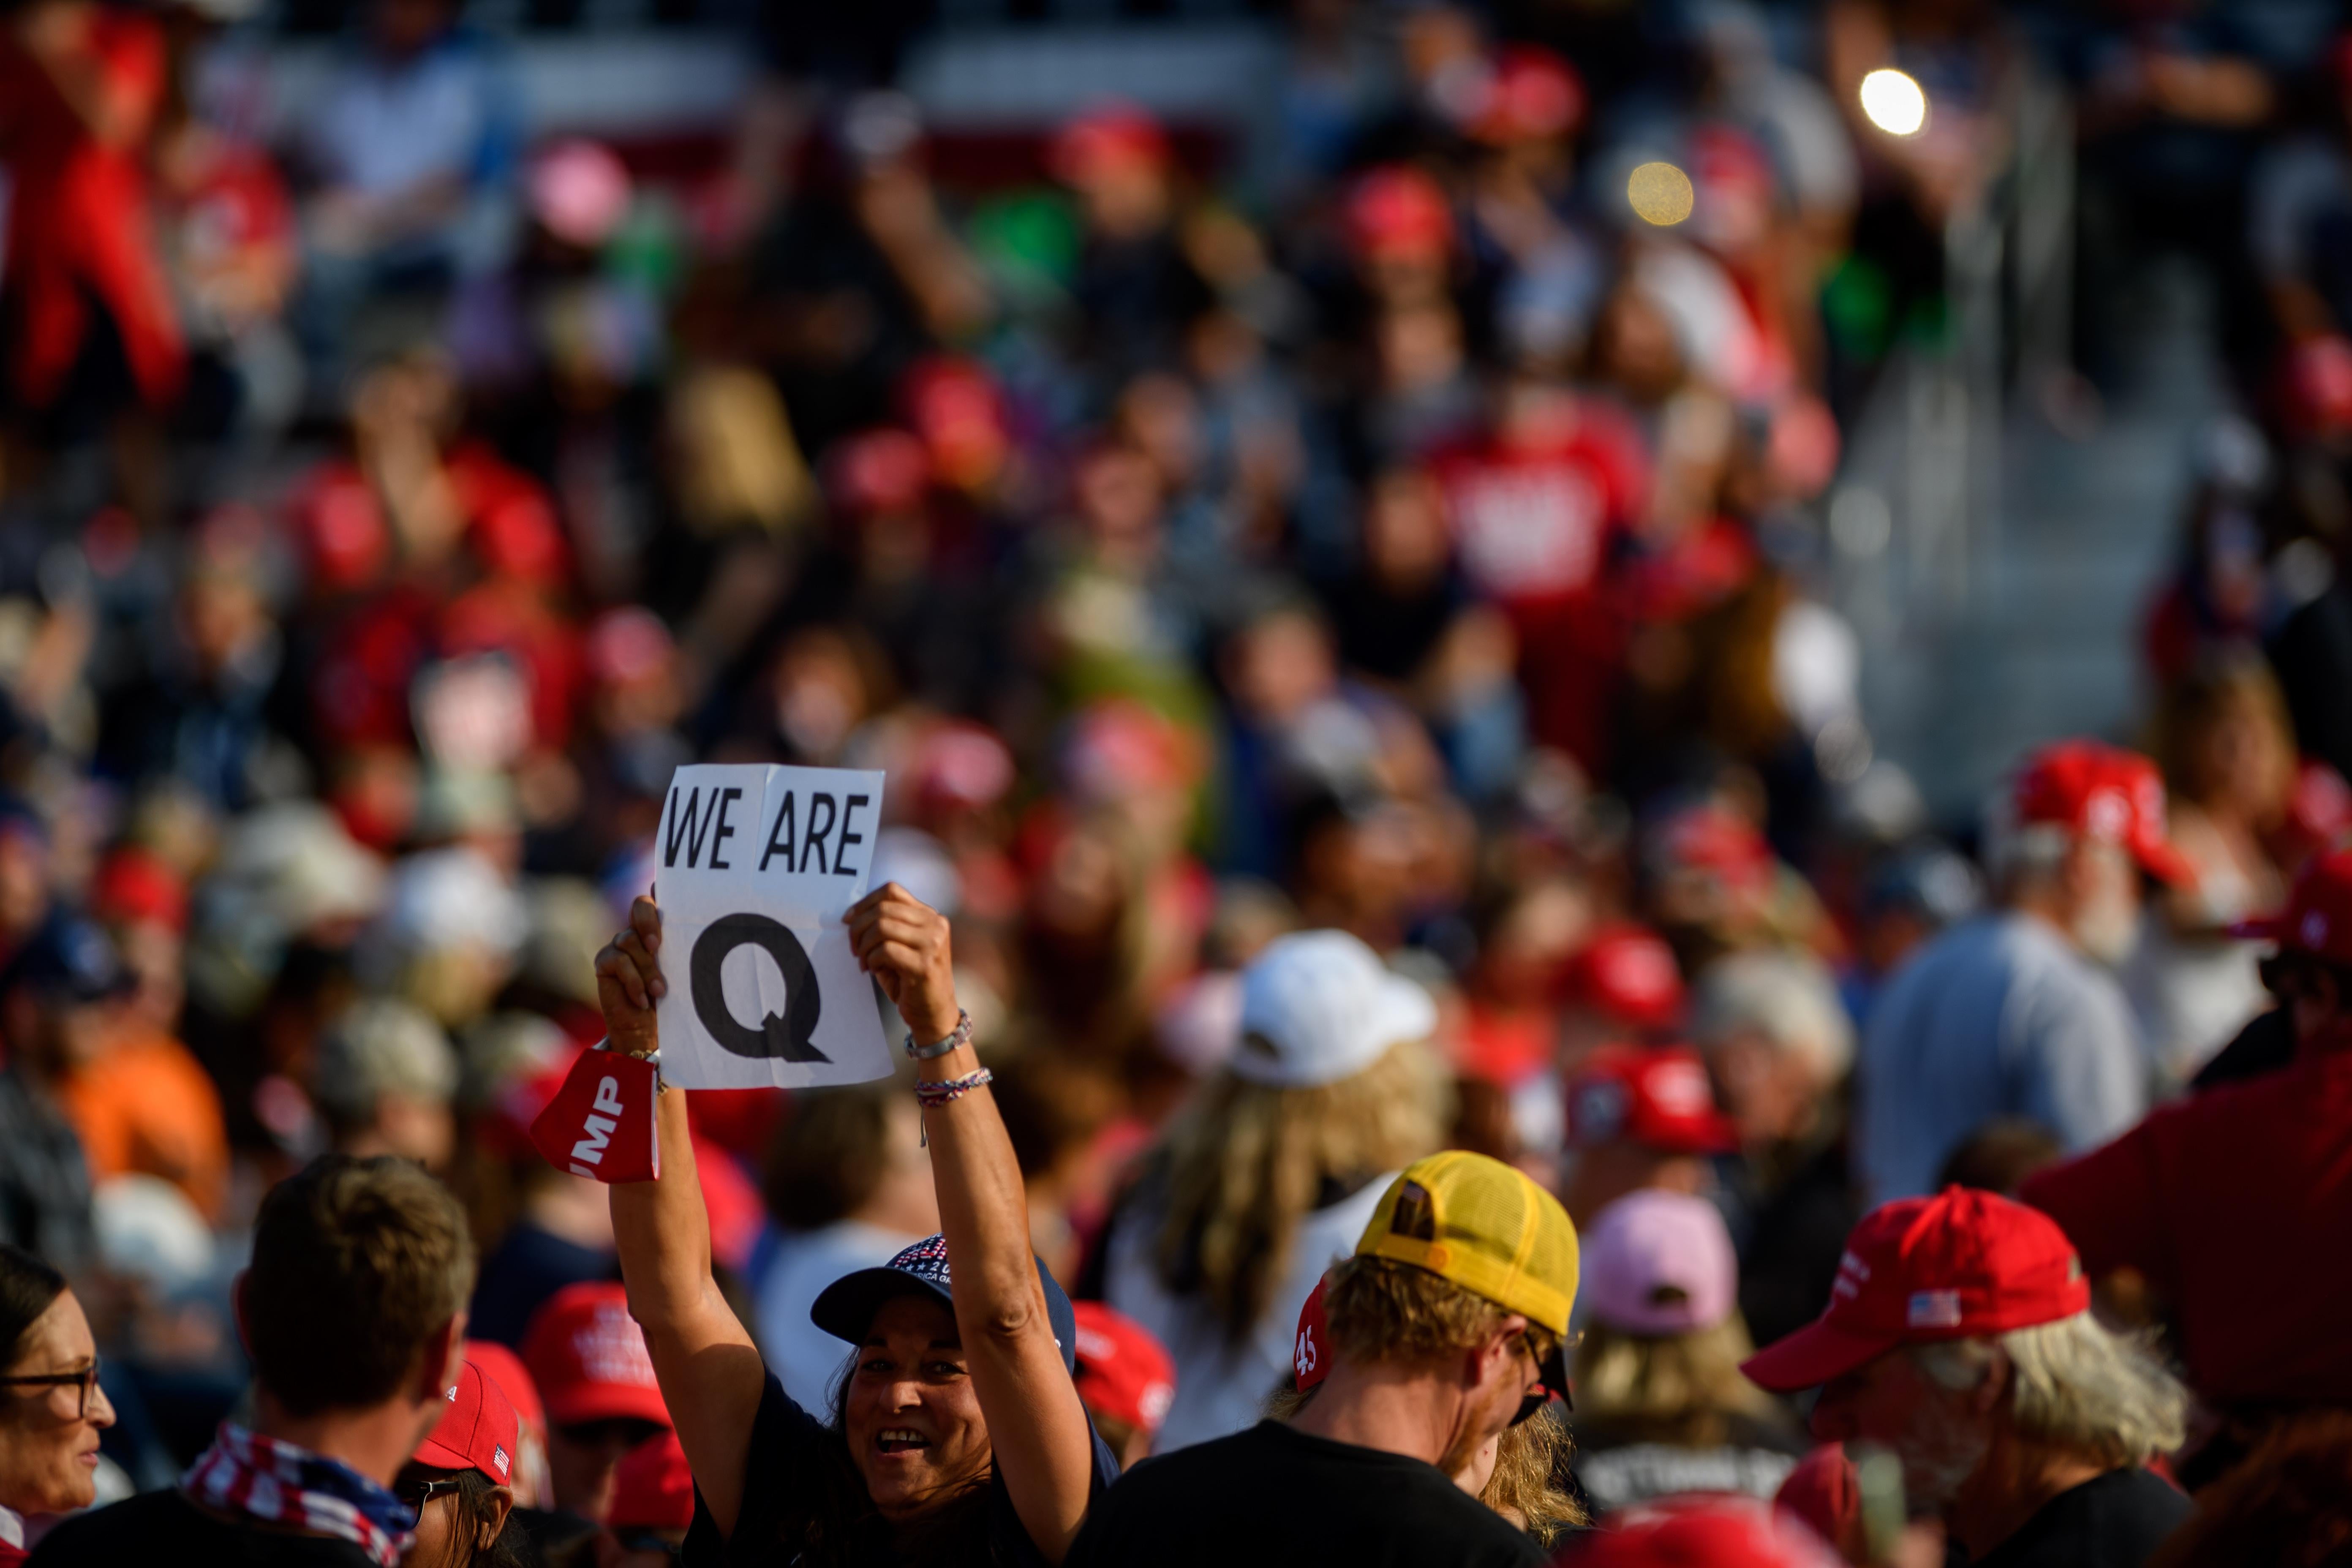 A person holds up a QAnon sign amid the crowd at a Trump rally on Sept. 22.